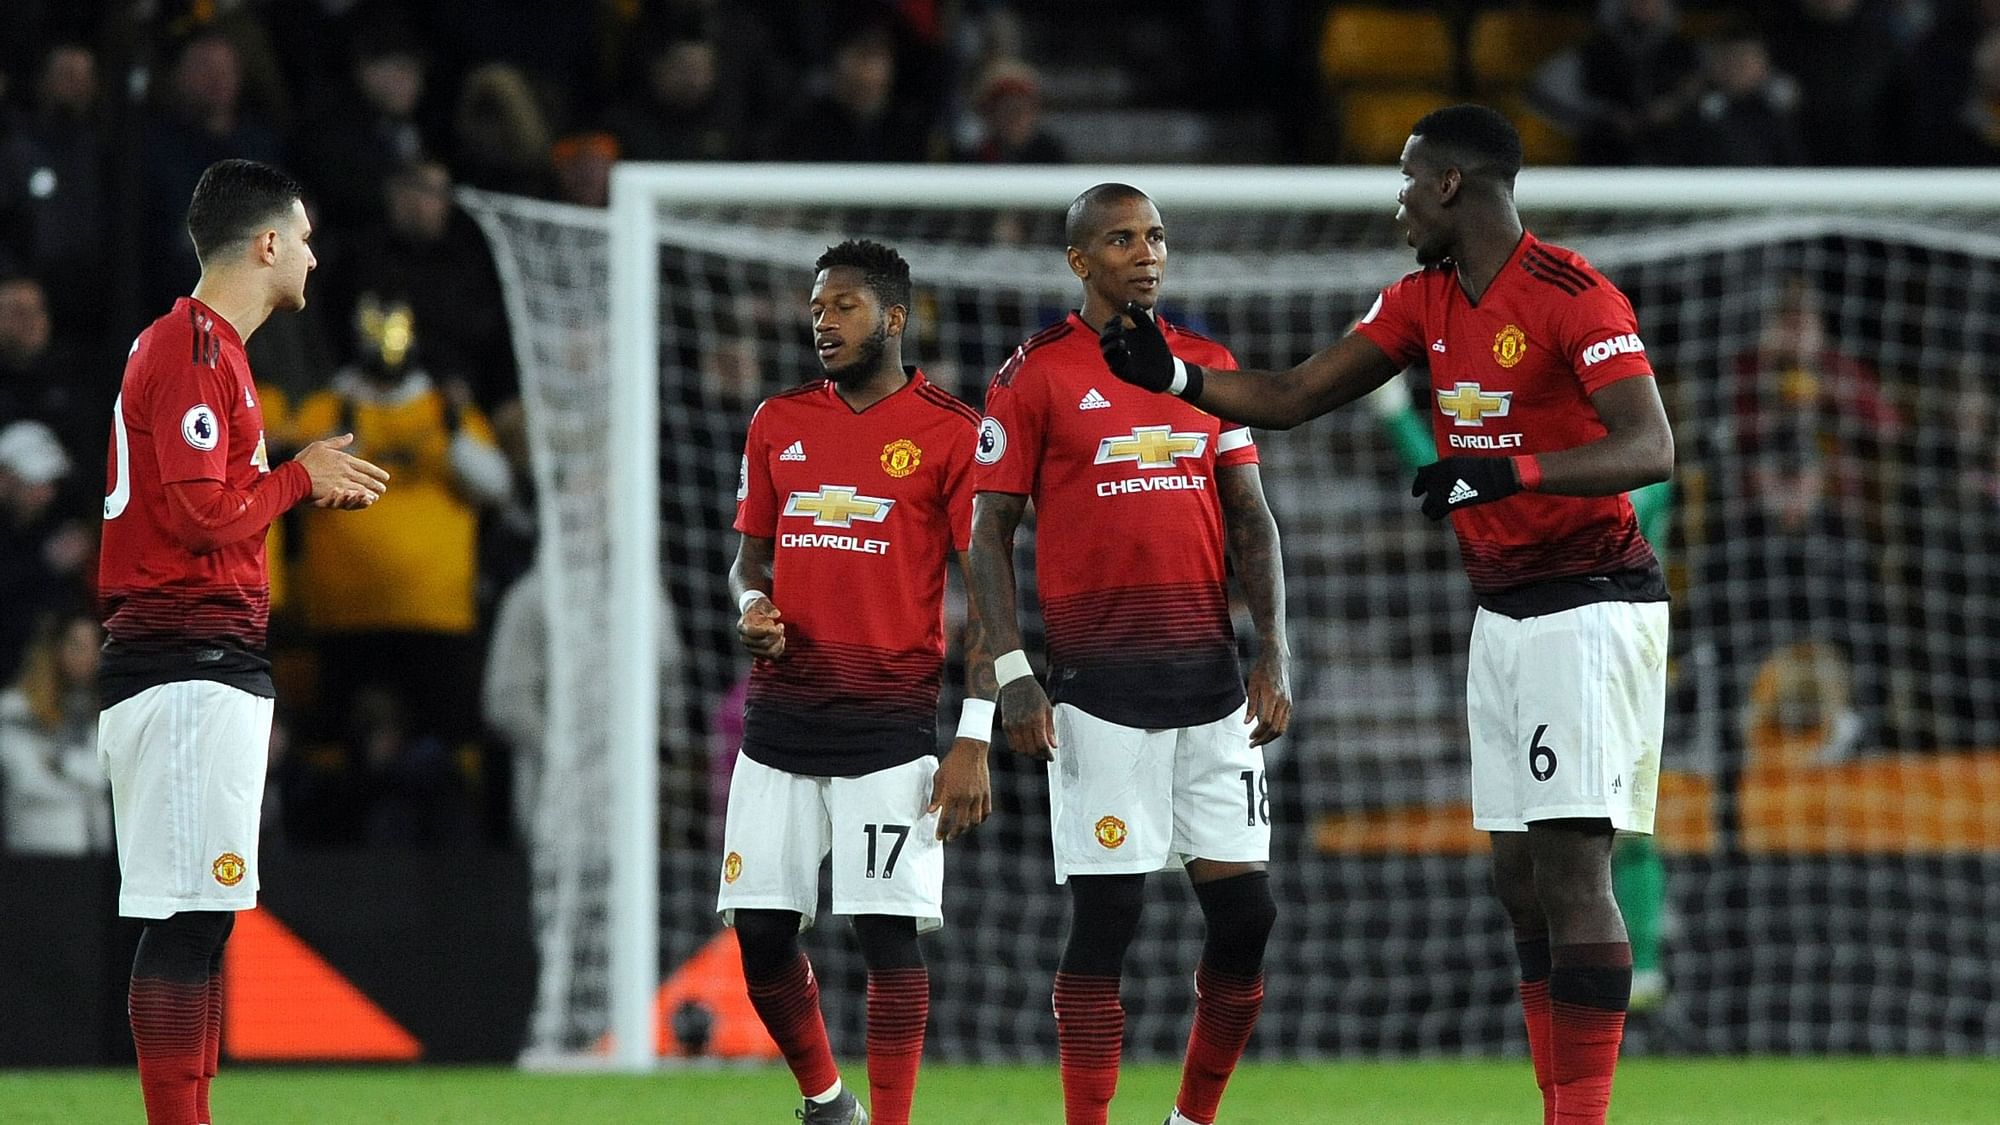 Manchester United’s Paul Pogba, right, talks to teammate Ashley Young during the English Premier League soccer match between Wolverhampton Wanderers and Manchester United at the Molineux Stadium in Wolverhampton, England, Tuesday, April 2, 2019.&nbsp;